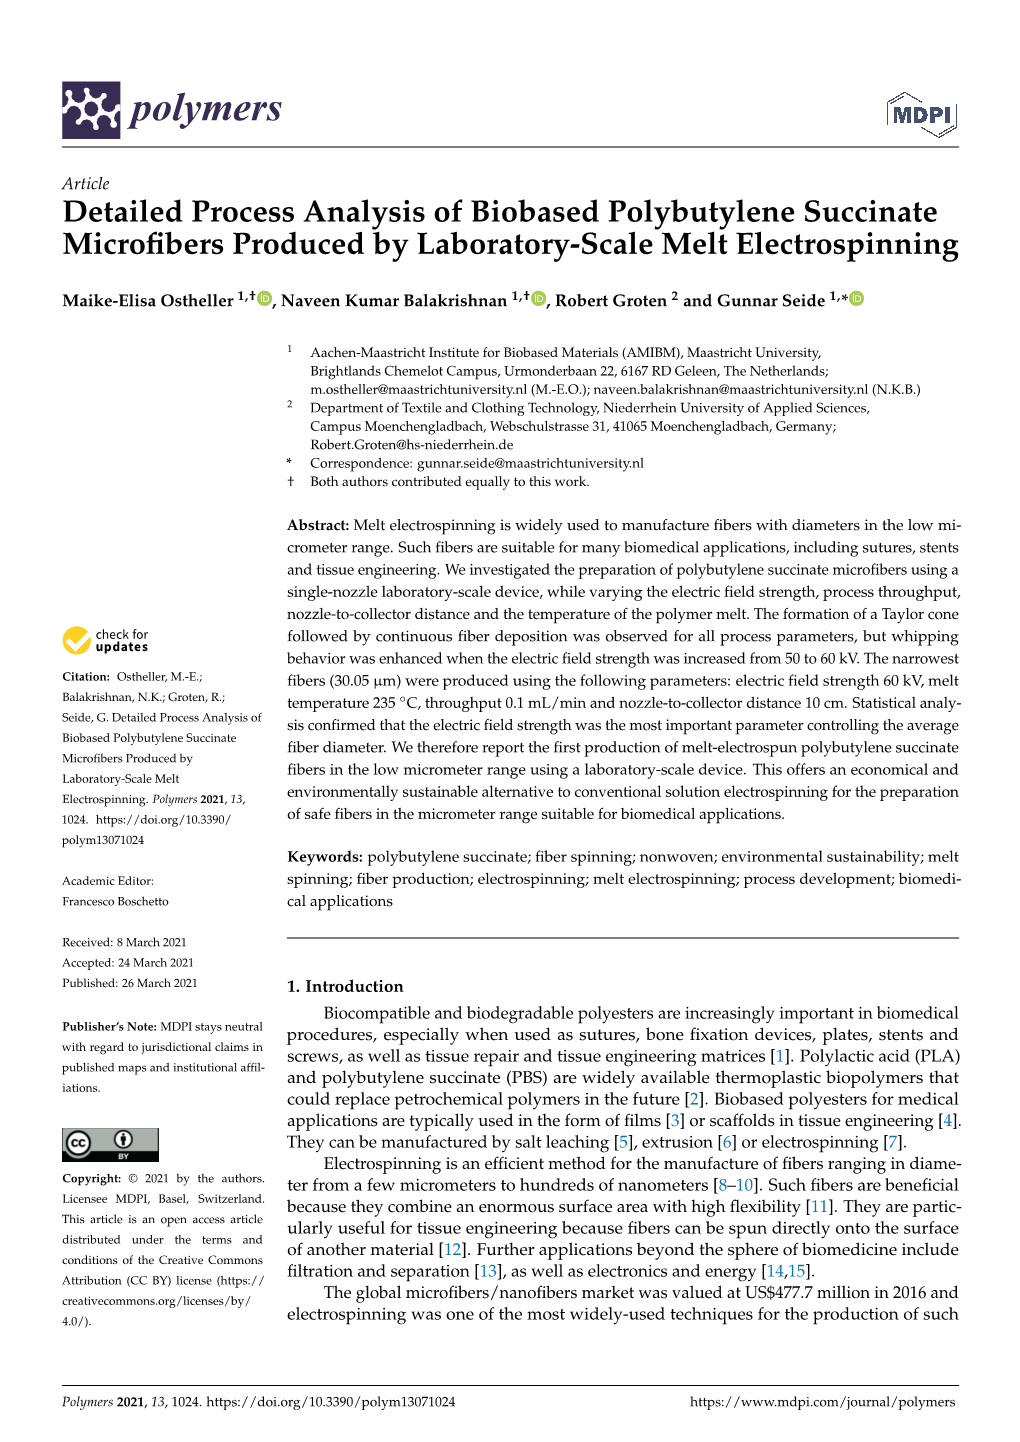 Detailed Process Analysis of Biobased Polybutylene Succinate Microﬁbers Produced by Laboratory-Scale Melt Electrospinning